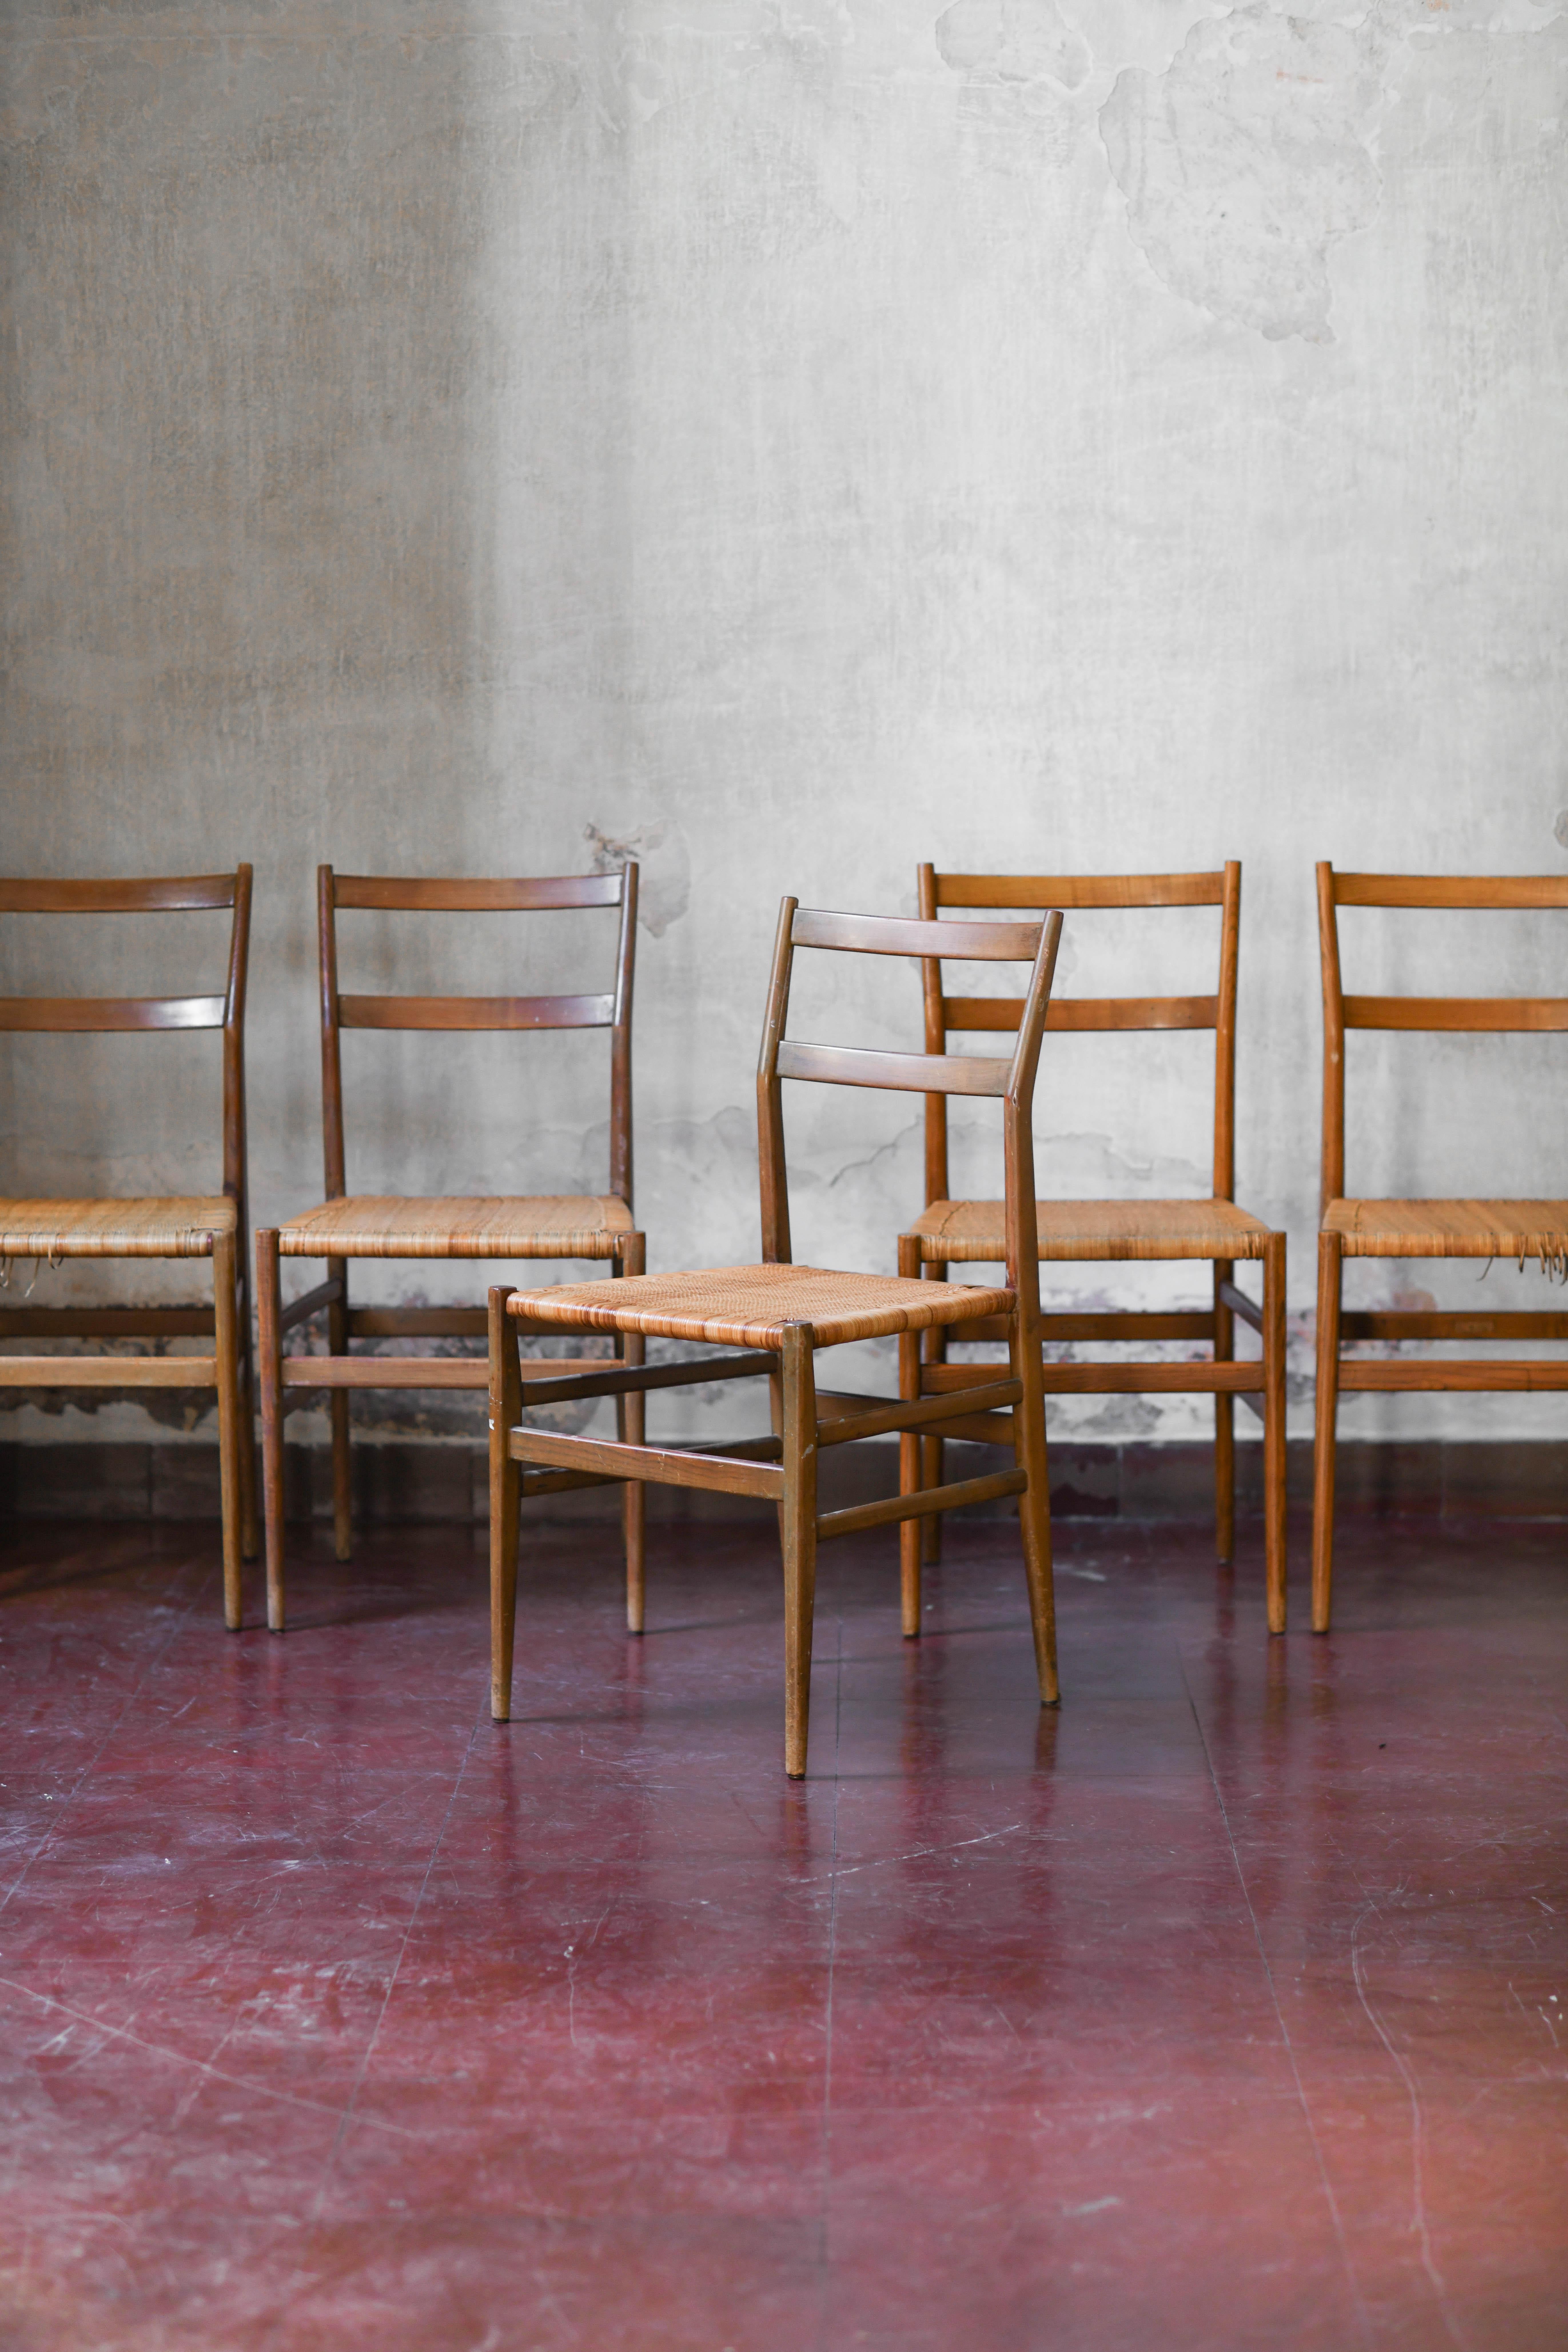 Leggera chair by Gio Ponti – set of 7 pieces, original edition from the 1950s.
Product details
Dimensions: 52 L x 81 H x 51 D cm